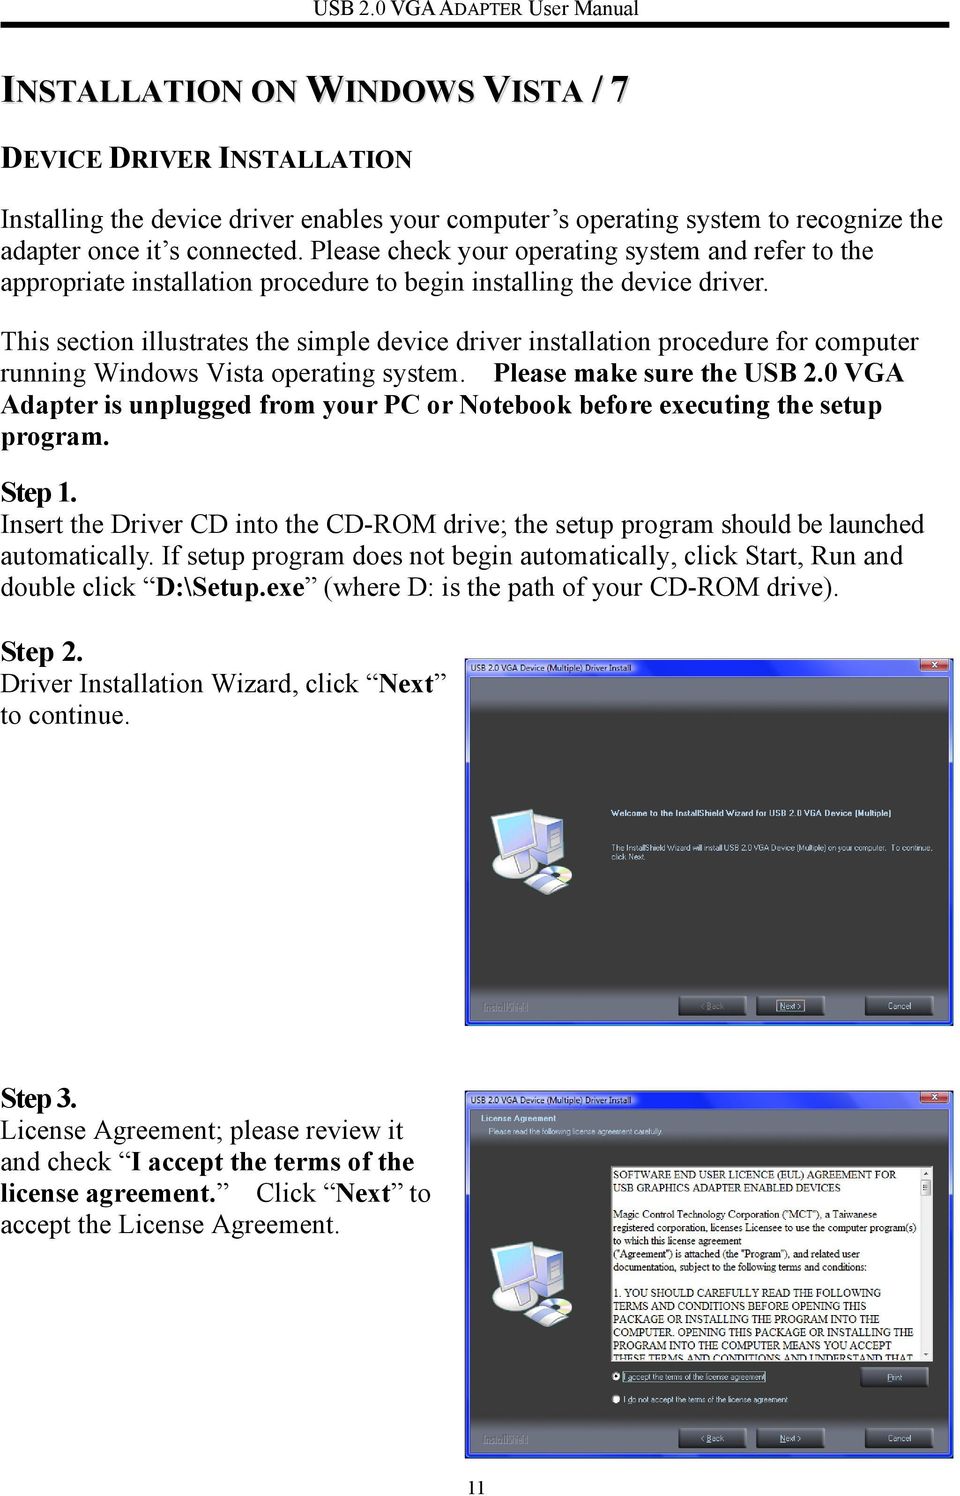 This section illustrates the simple device driver installation procedure for computer running Windows Vista operating system. Please make sure the USB 2.